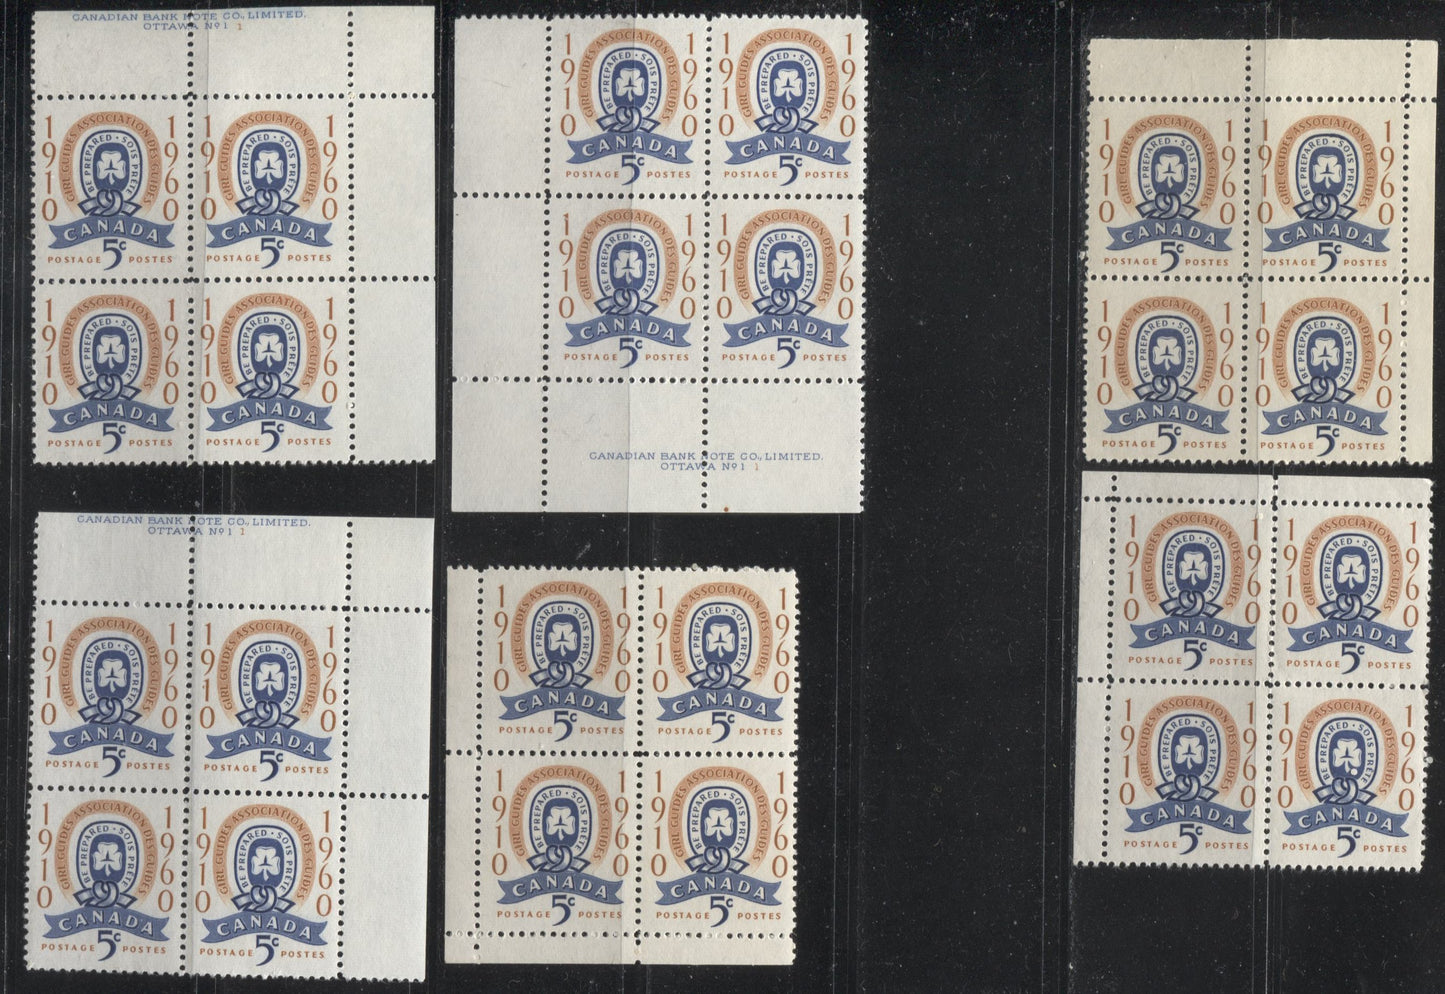 Canada #389 5c Golden Brown and Deep Ultramarine 1960 50th Anniversary of Girl Guides Issue,  A Group of 8 VFNH Field Stock and Plate Blocks, All Different With Respect to Paper, Shade, Position or Perf.